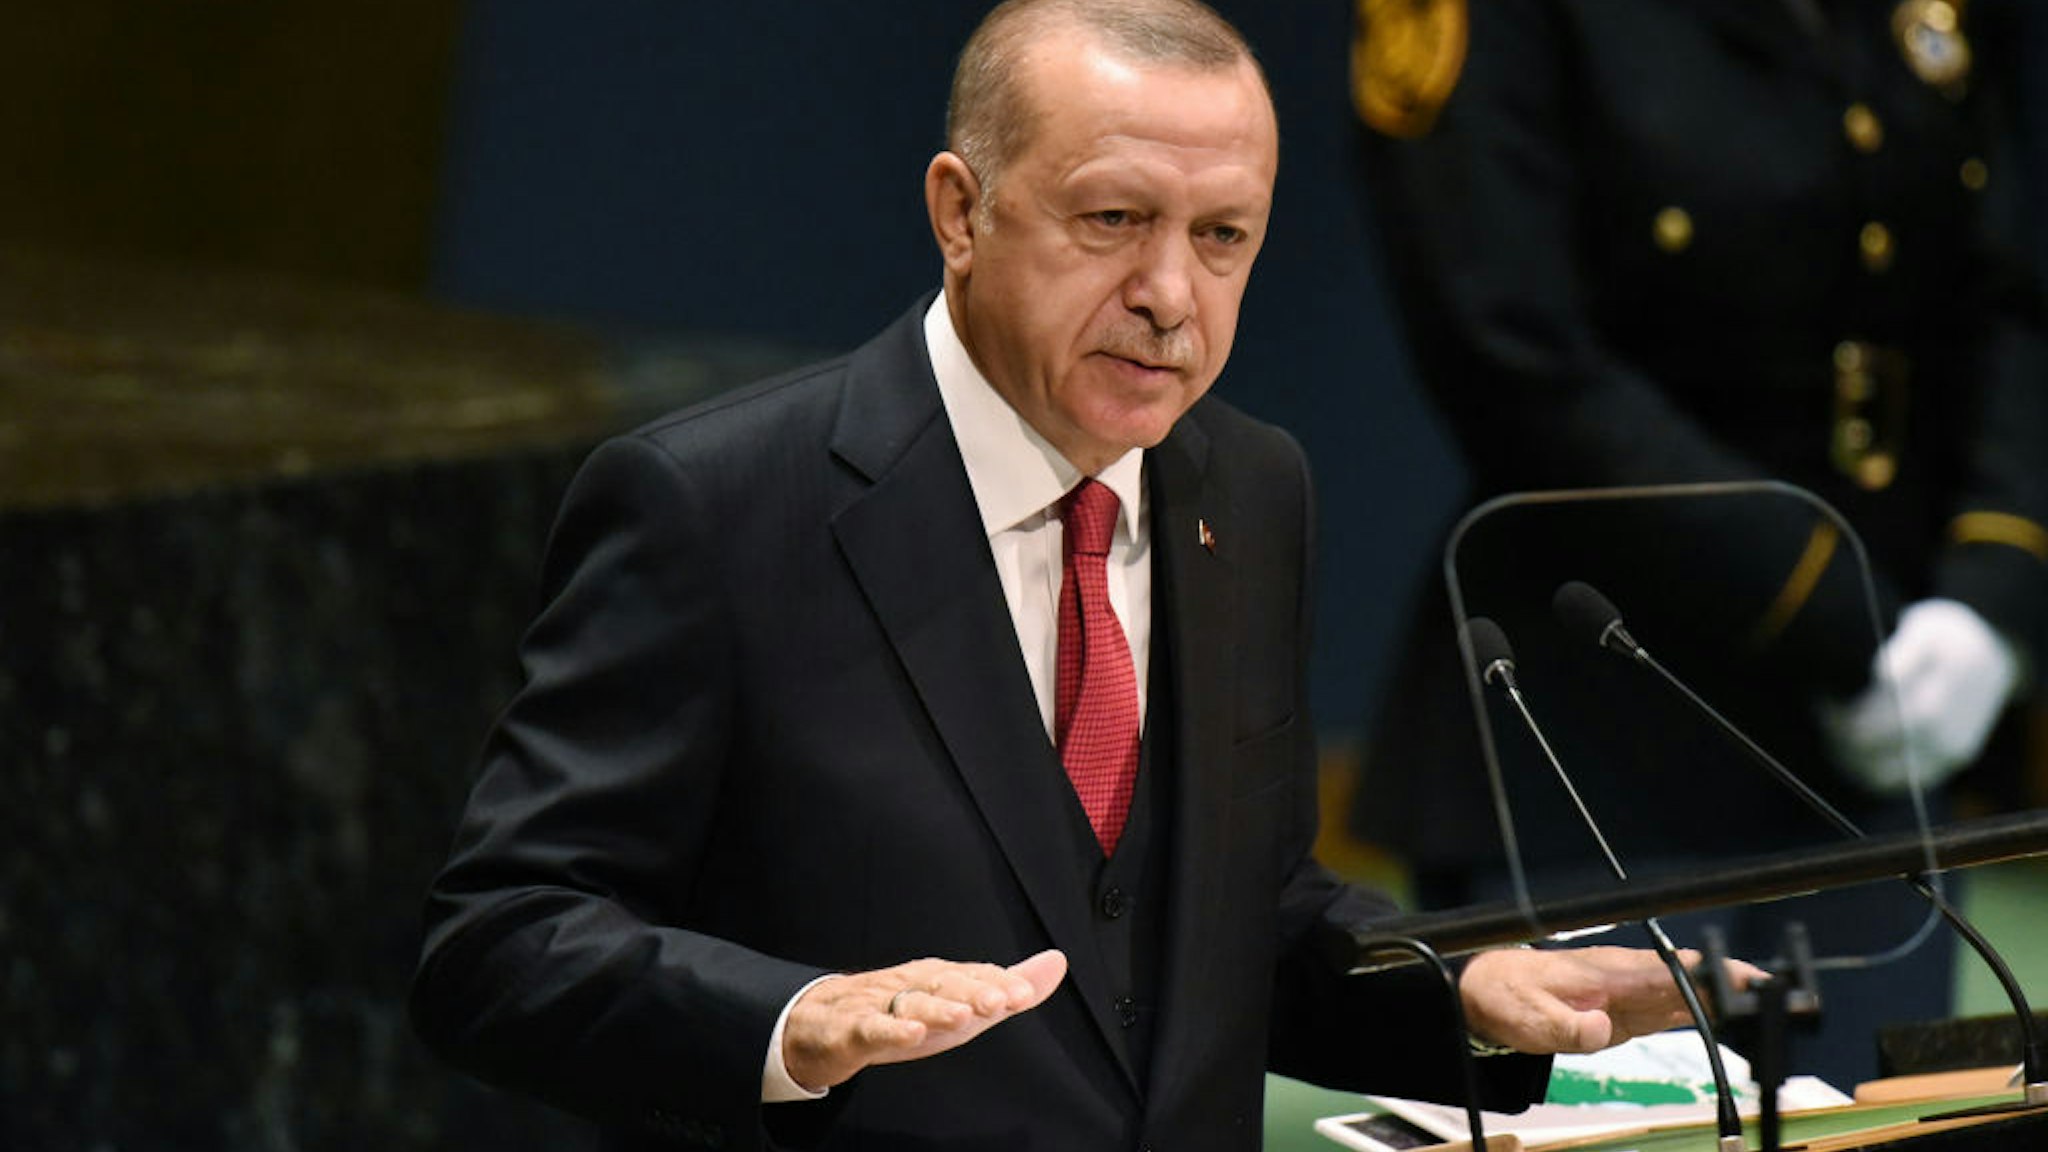 NEW YORK, NY - SEPTEMBER 24: Turkish President Recep Tayyip Erdoan speaks at the United Nations (U.N.) General Assembly on September 24, 2019 in New York City. World leaders are gathered for the 74th session of the UN amid a warning by Secretary-General Antonio Guterres in his address yesterday of the looming risk of a world splitting between the two largest economies - the U.S. and China.